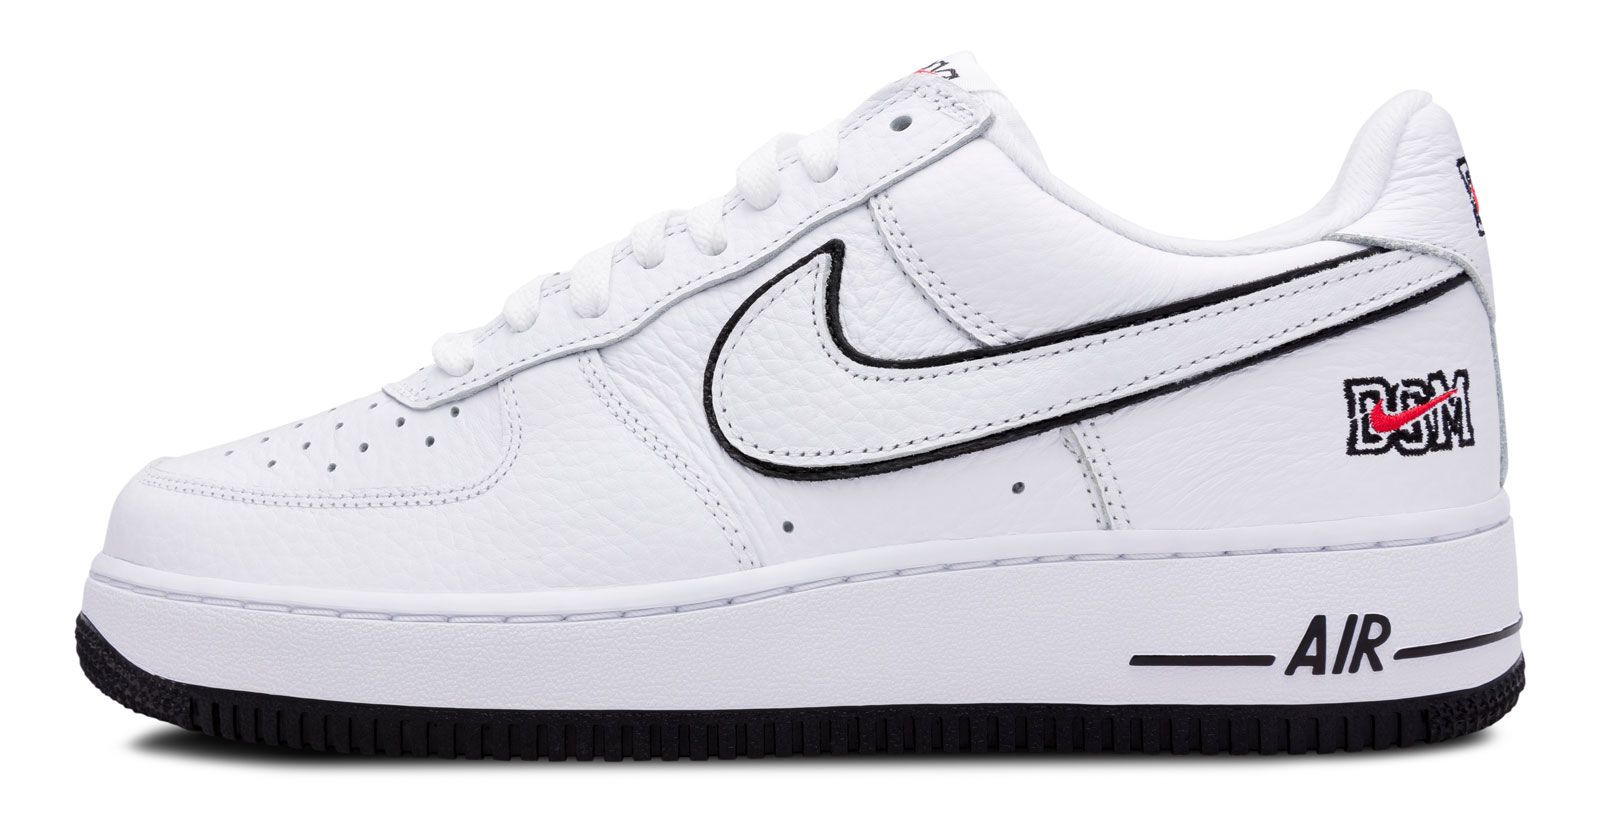 nike air force 1 low retro dsmny